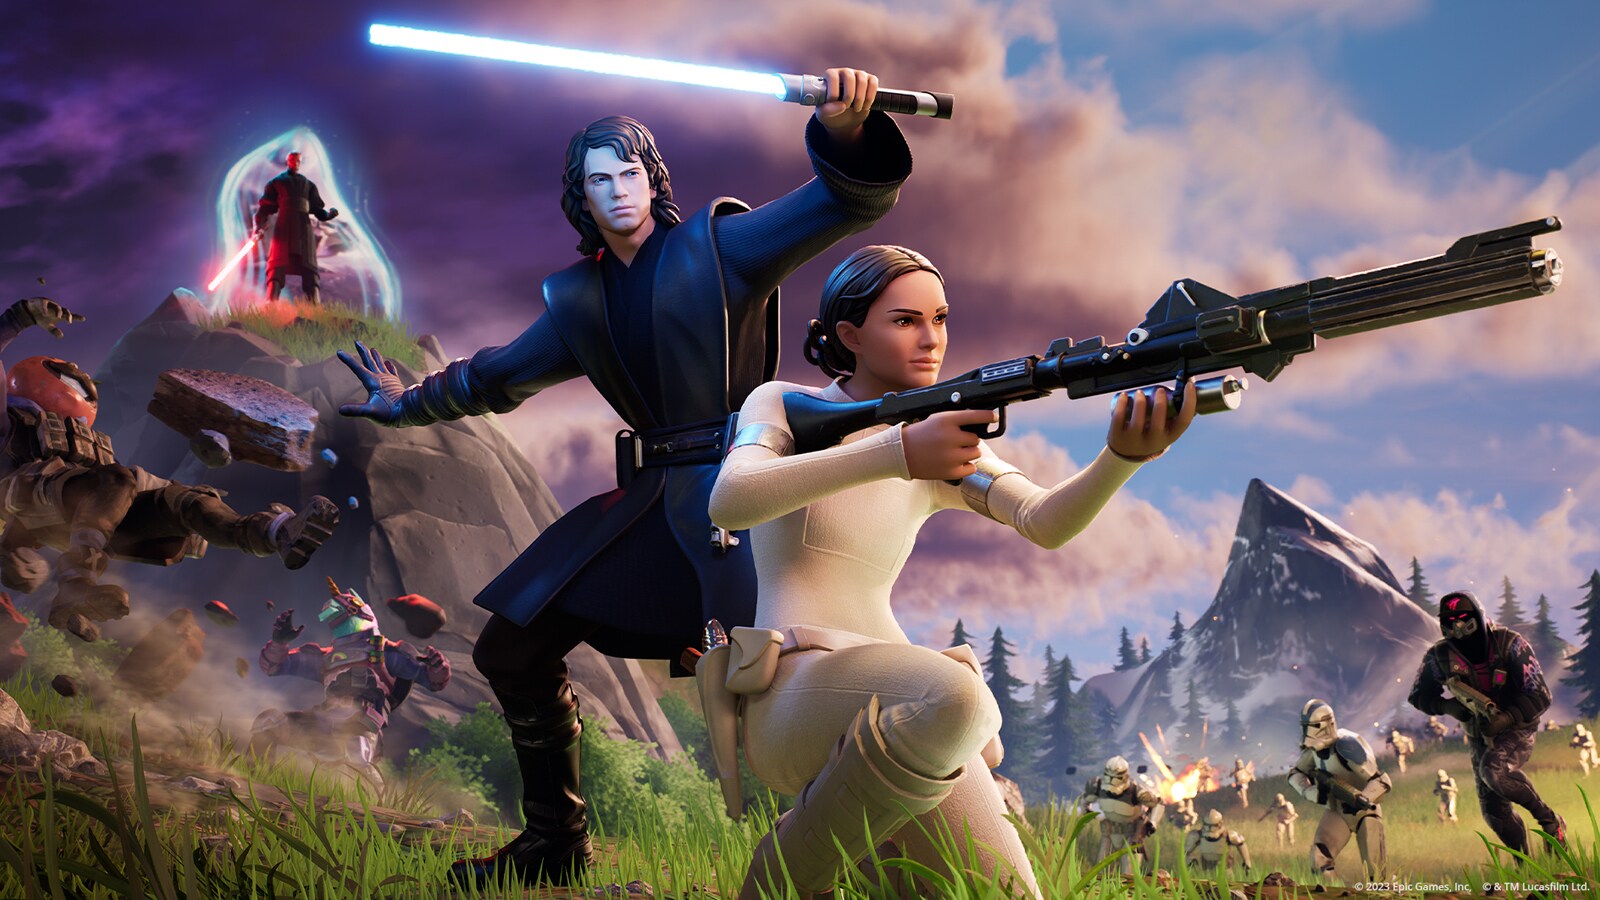 Anakin Skywalker and Padme Amidala in key art for Fortnite's Star Wars activation